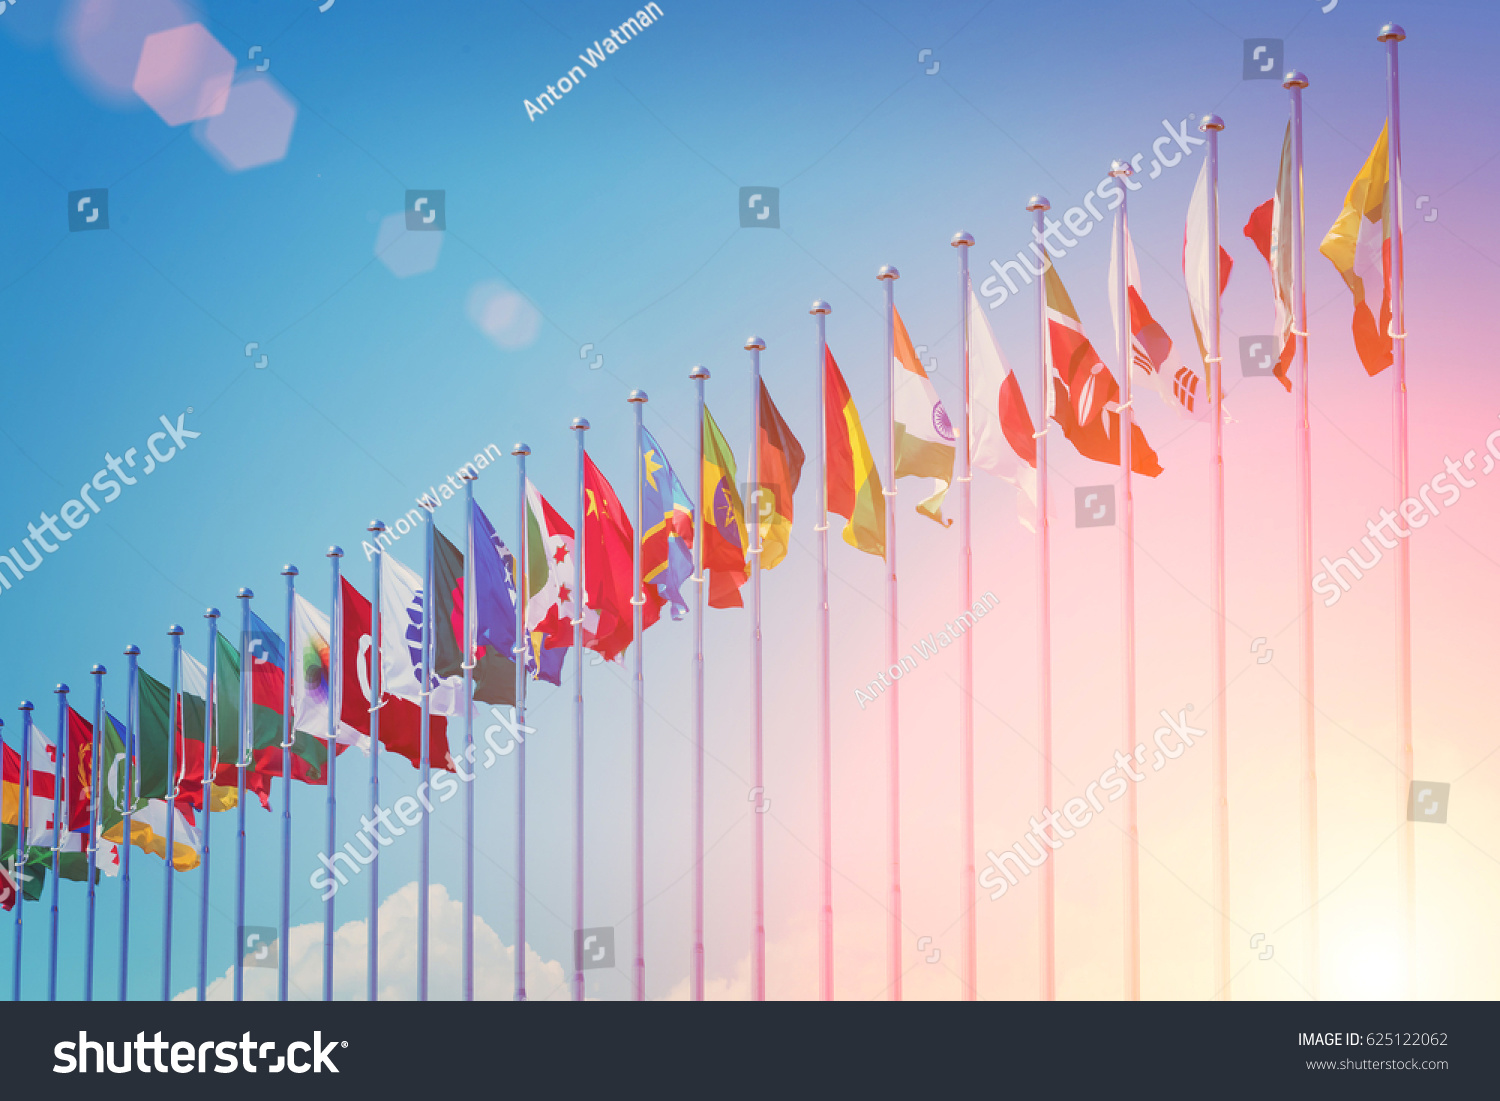 Flags of different countries on the background of the blue sky in the sunlight #625122062